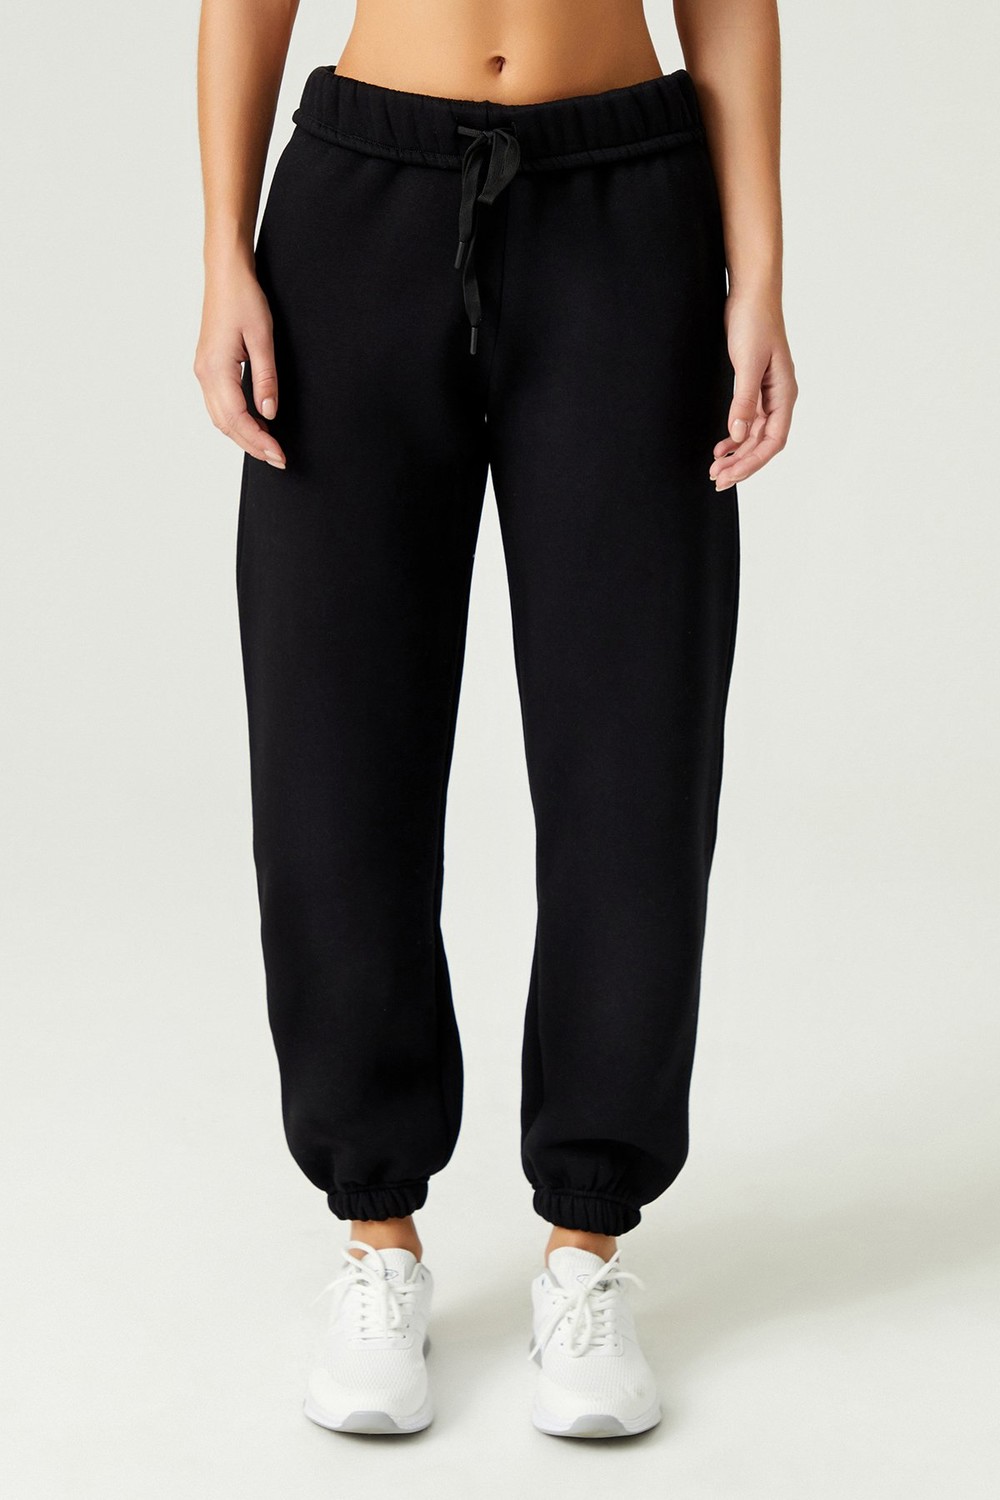 LOS OJOS x Melody Black Oversize/Wide Fit Cotton Thick Sweatpants